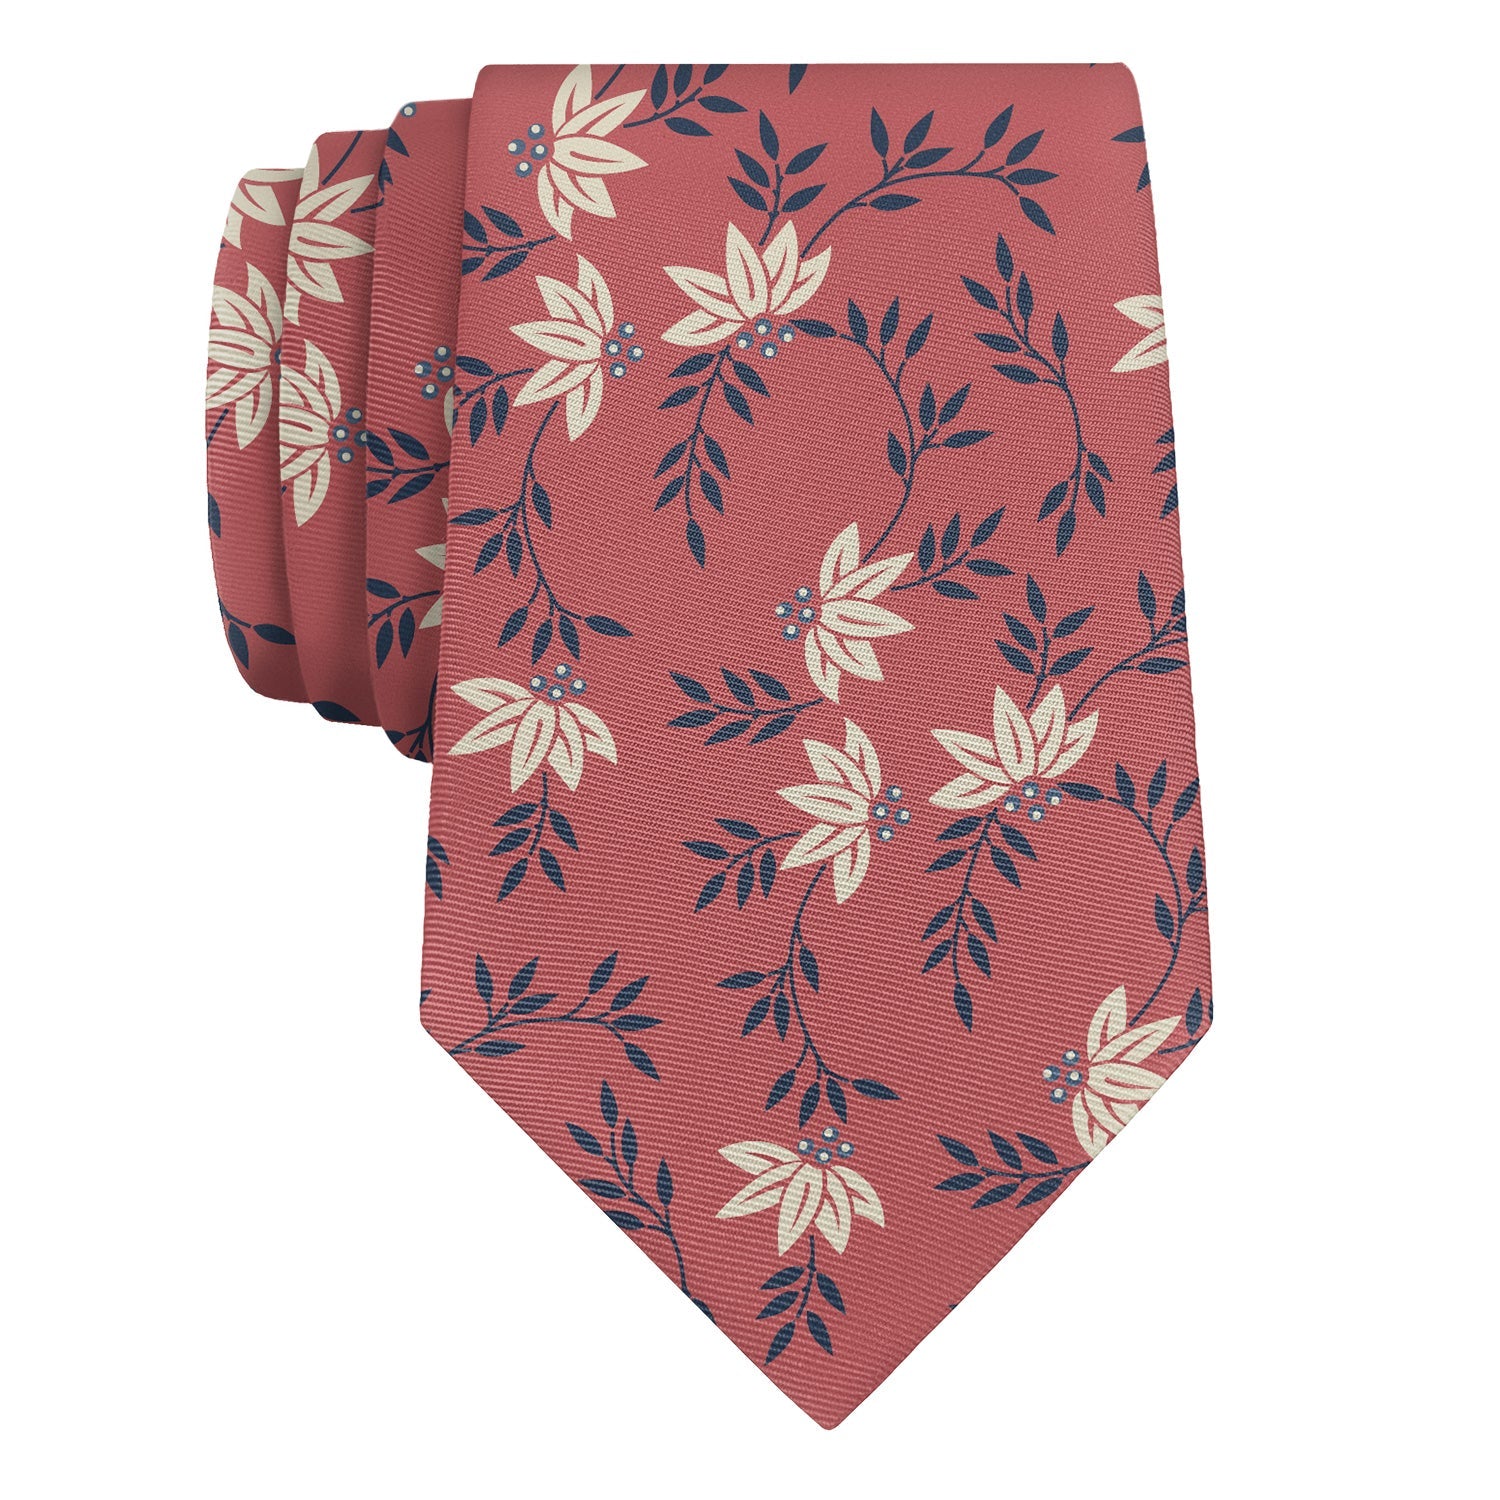 Blossom Heritage Necktie - Rolled - Knotty Tie Co.